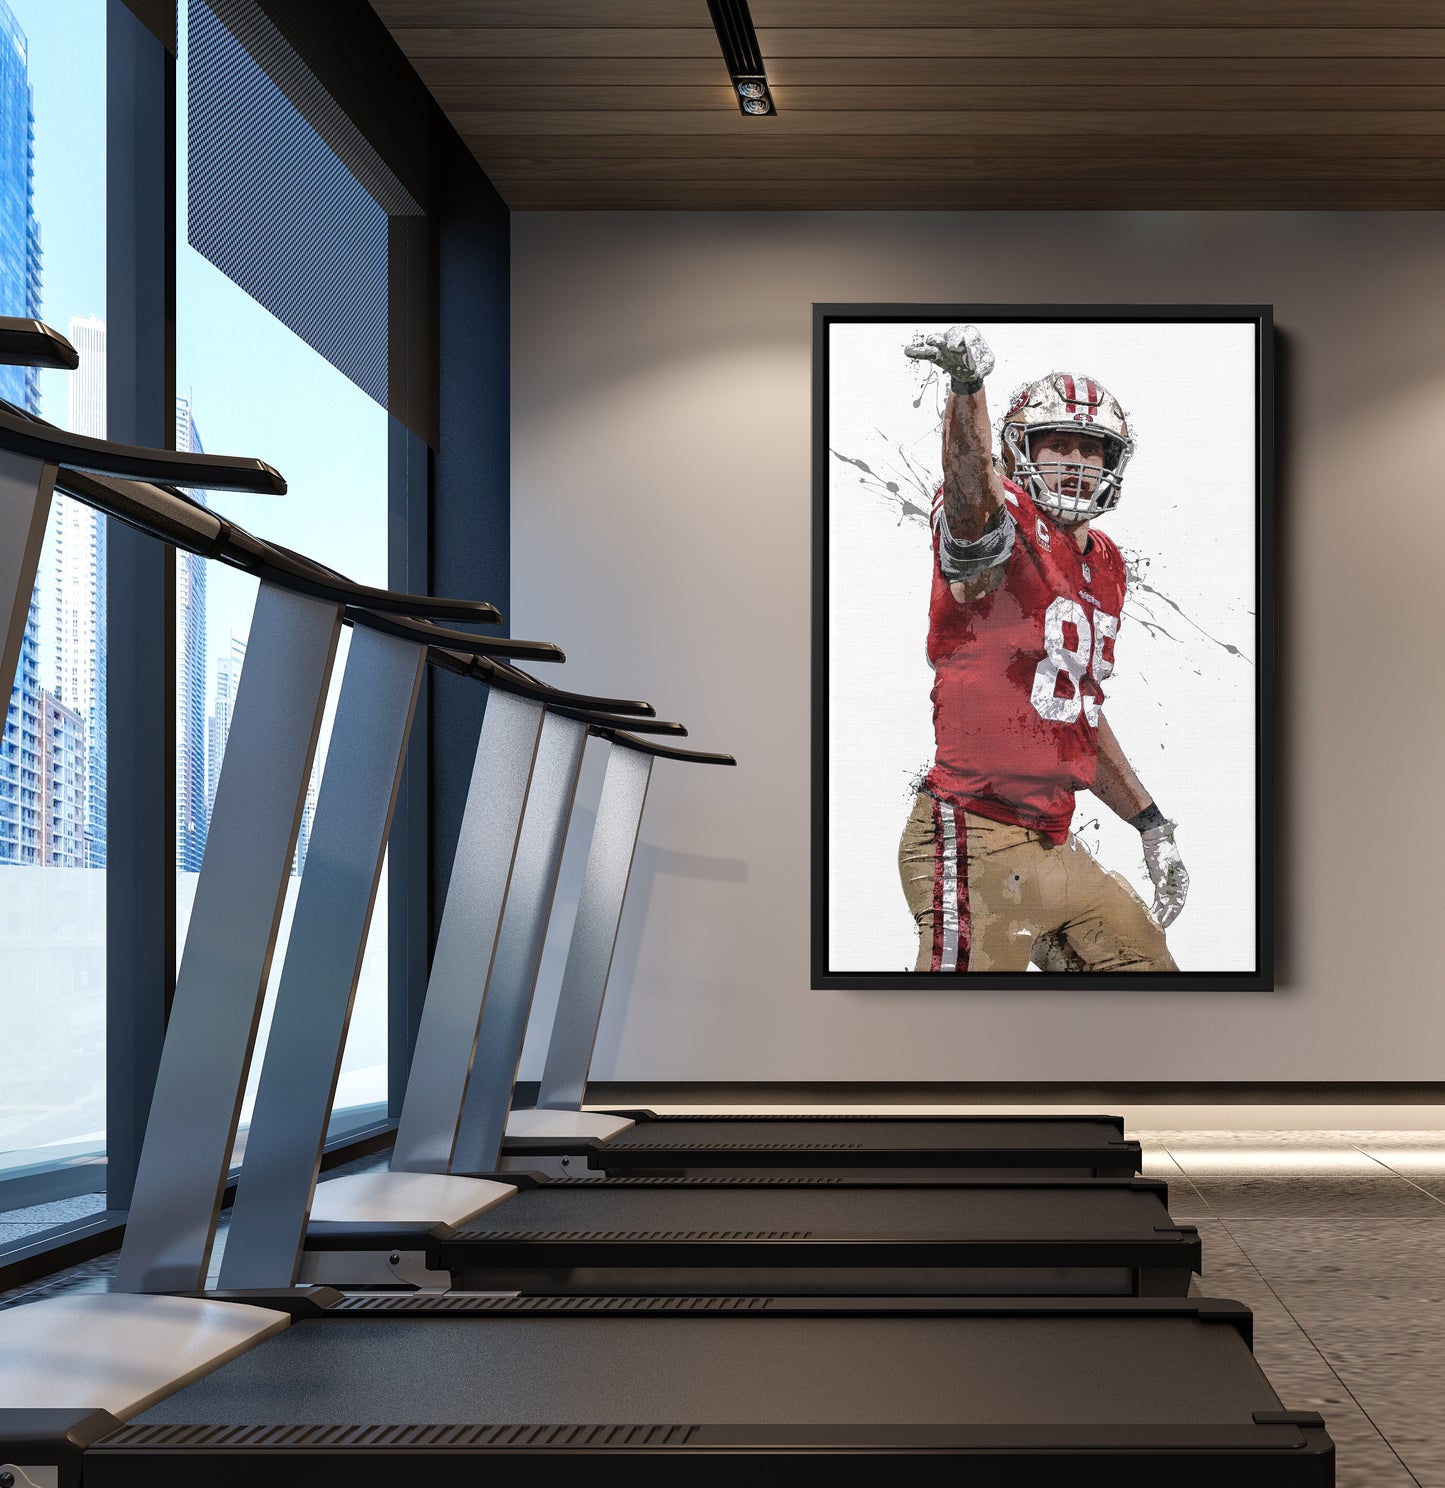 George Kittle Poster San Francisco 49ers Football Hand Made Posters Canvas Print Kids Wall Art Man Cave Gift Home Decor